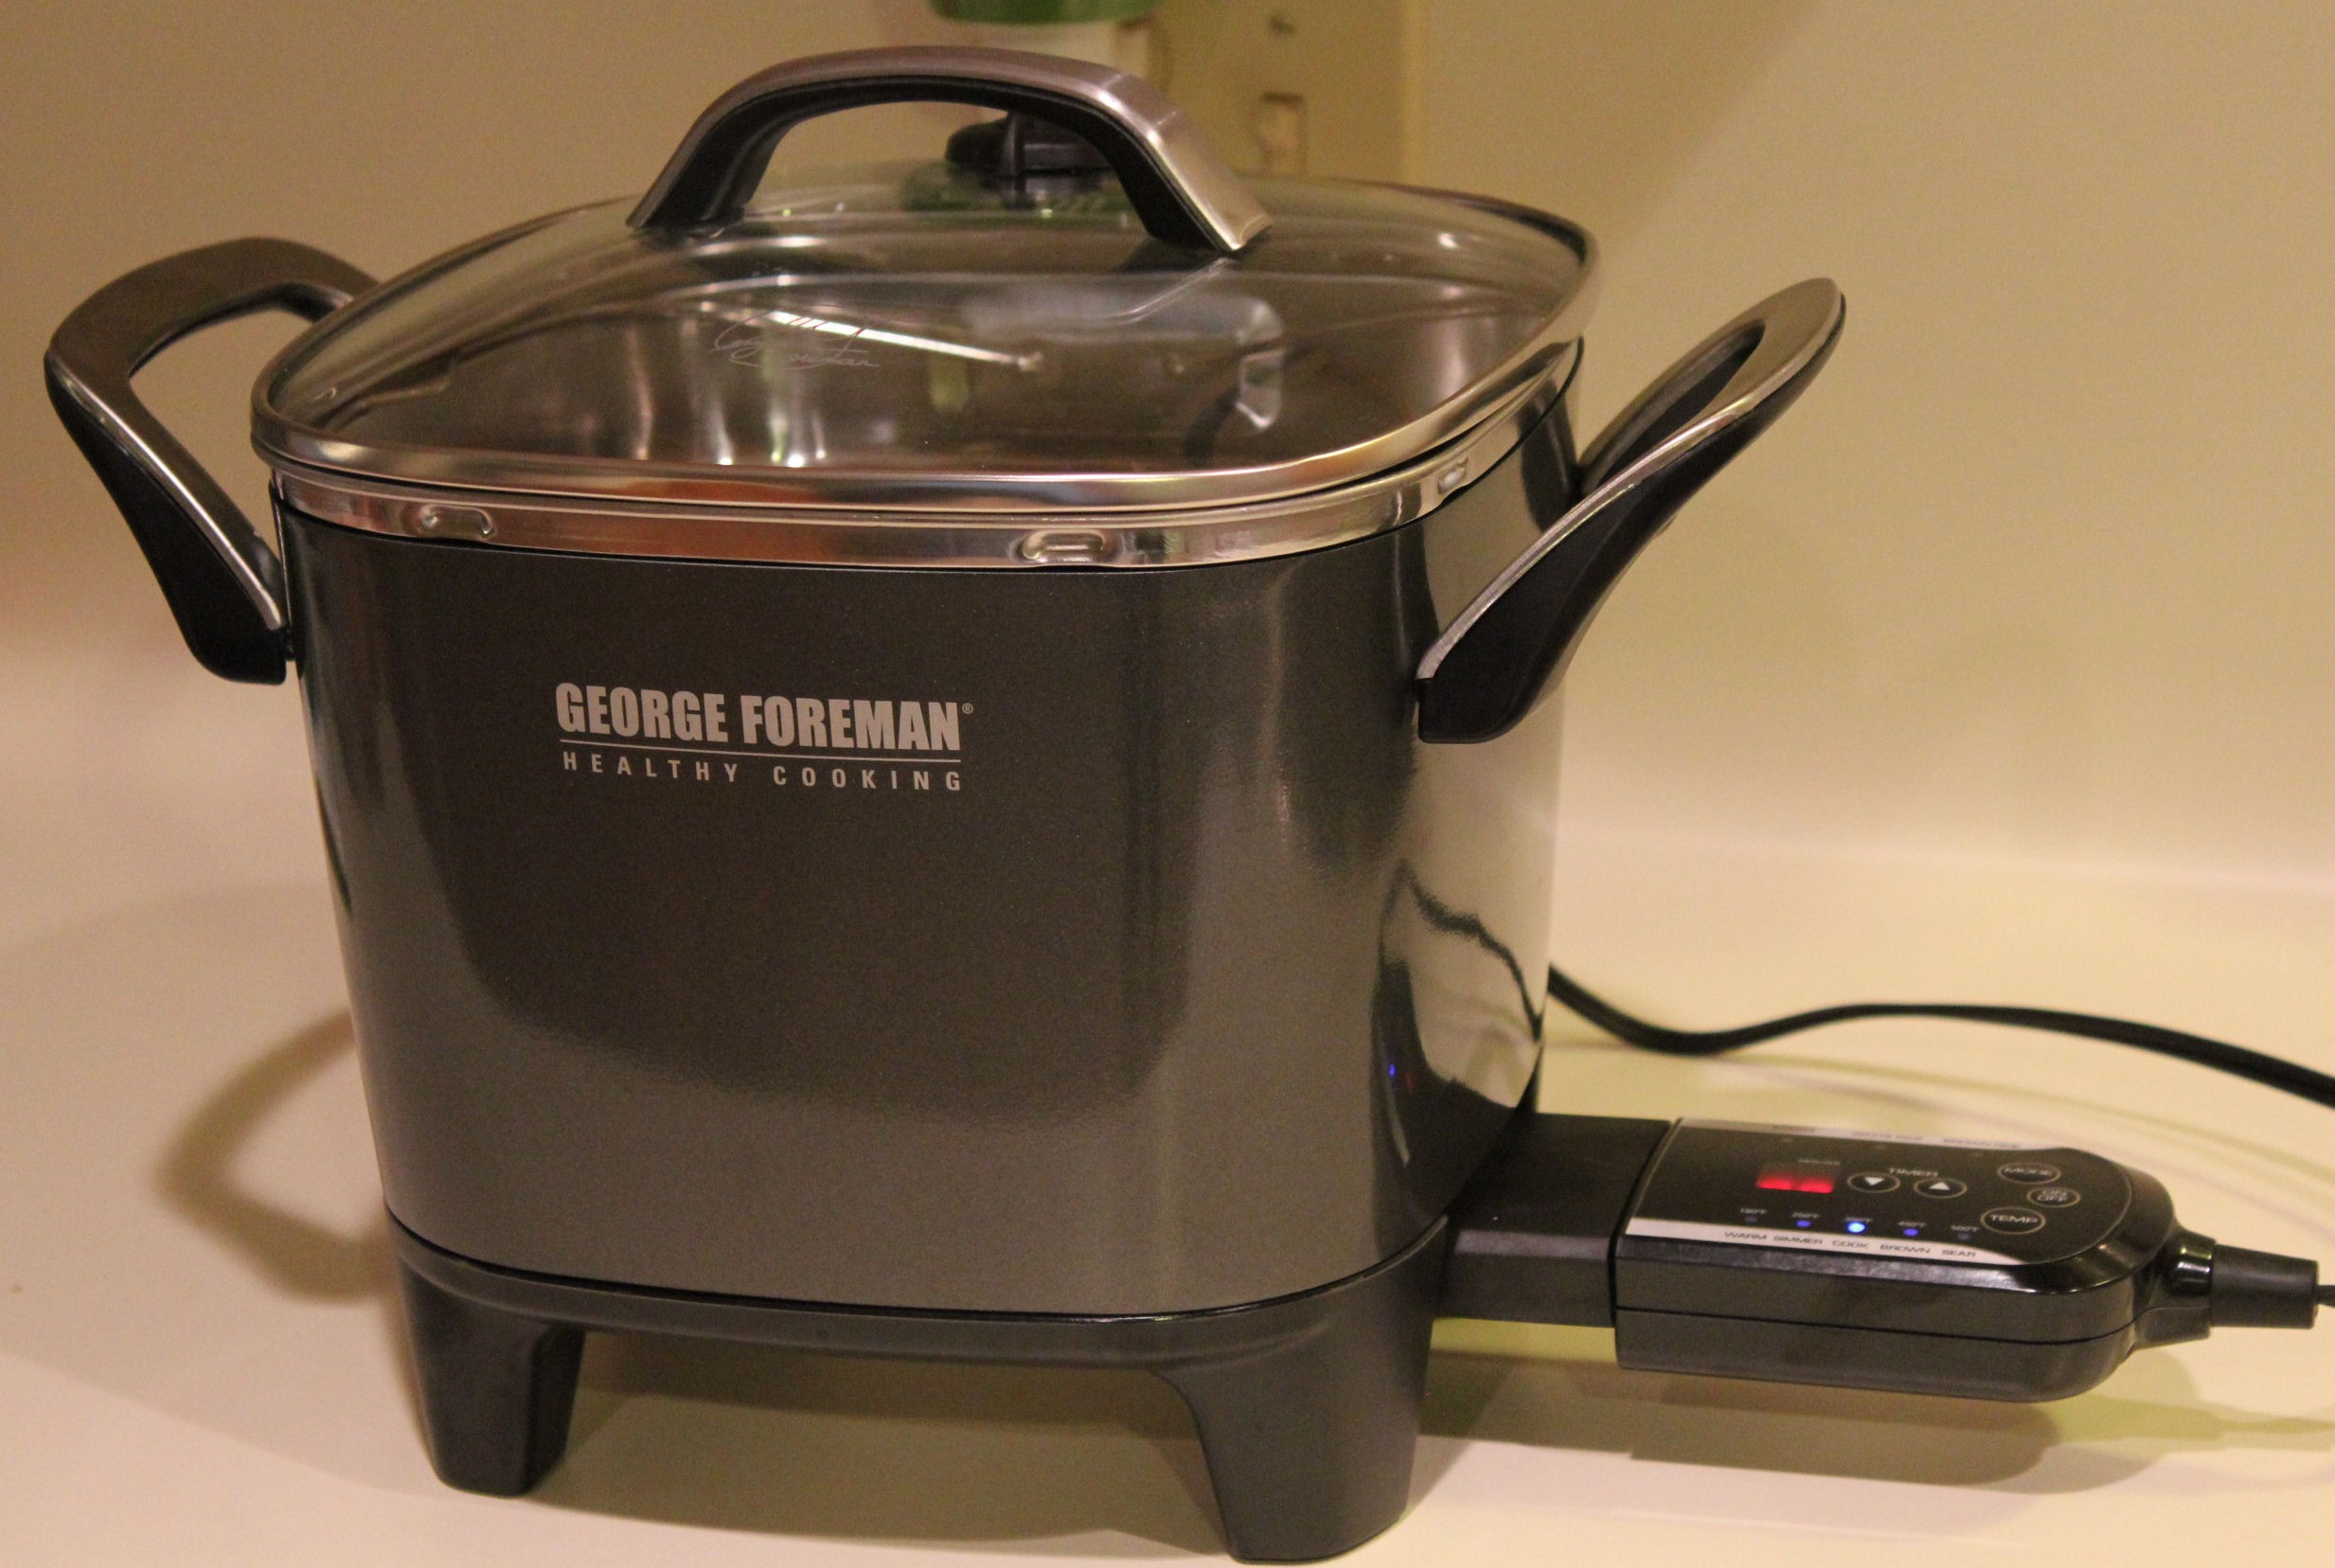 https://simplybeingmommy.com/wp-content/uploads/2010/12/george-foreman-multicooker.jpg